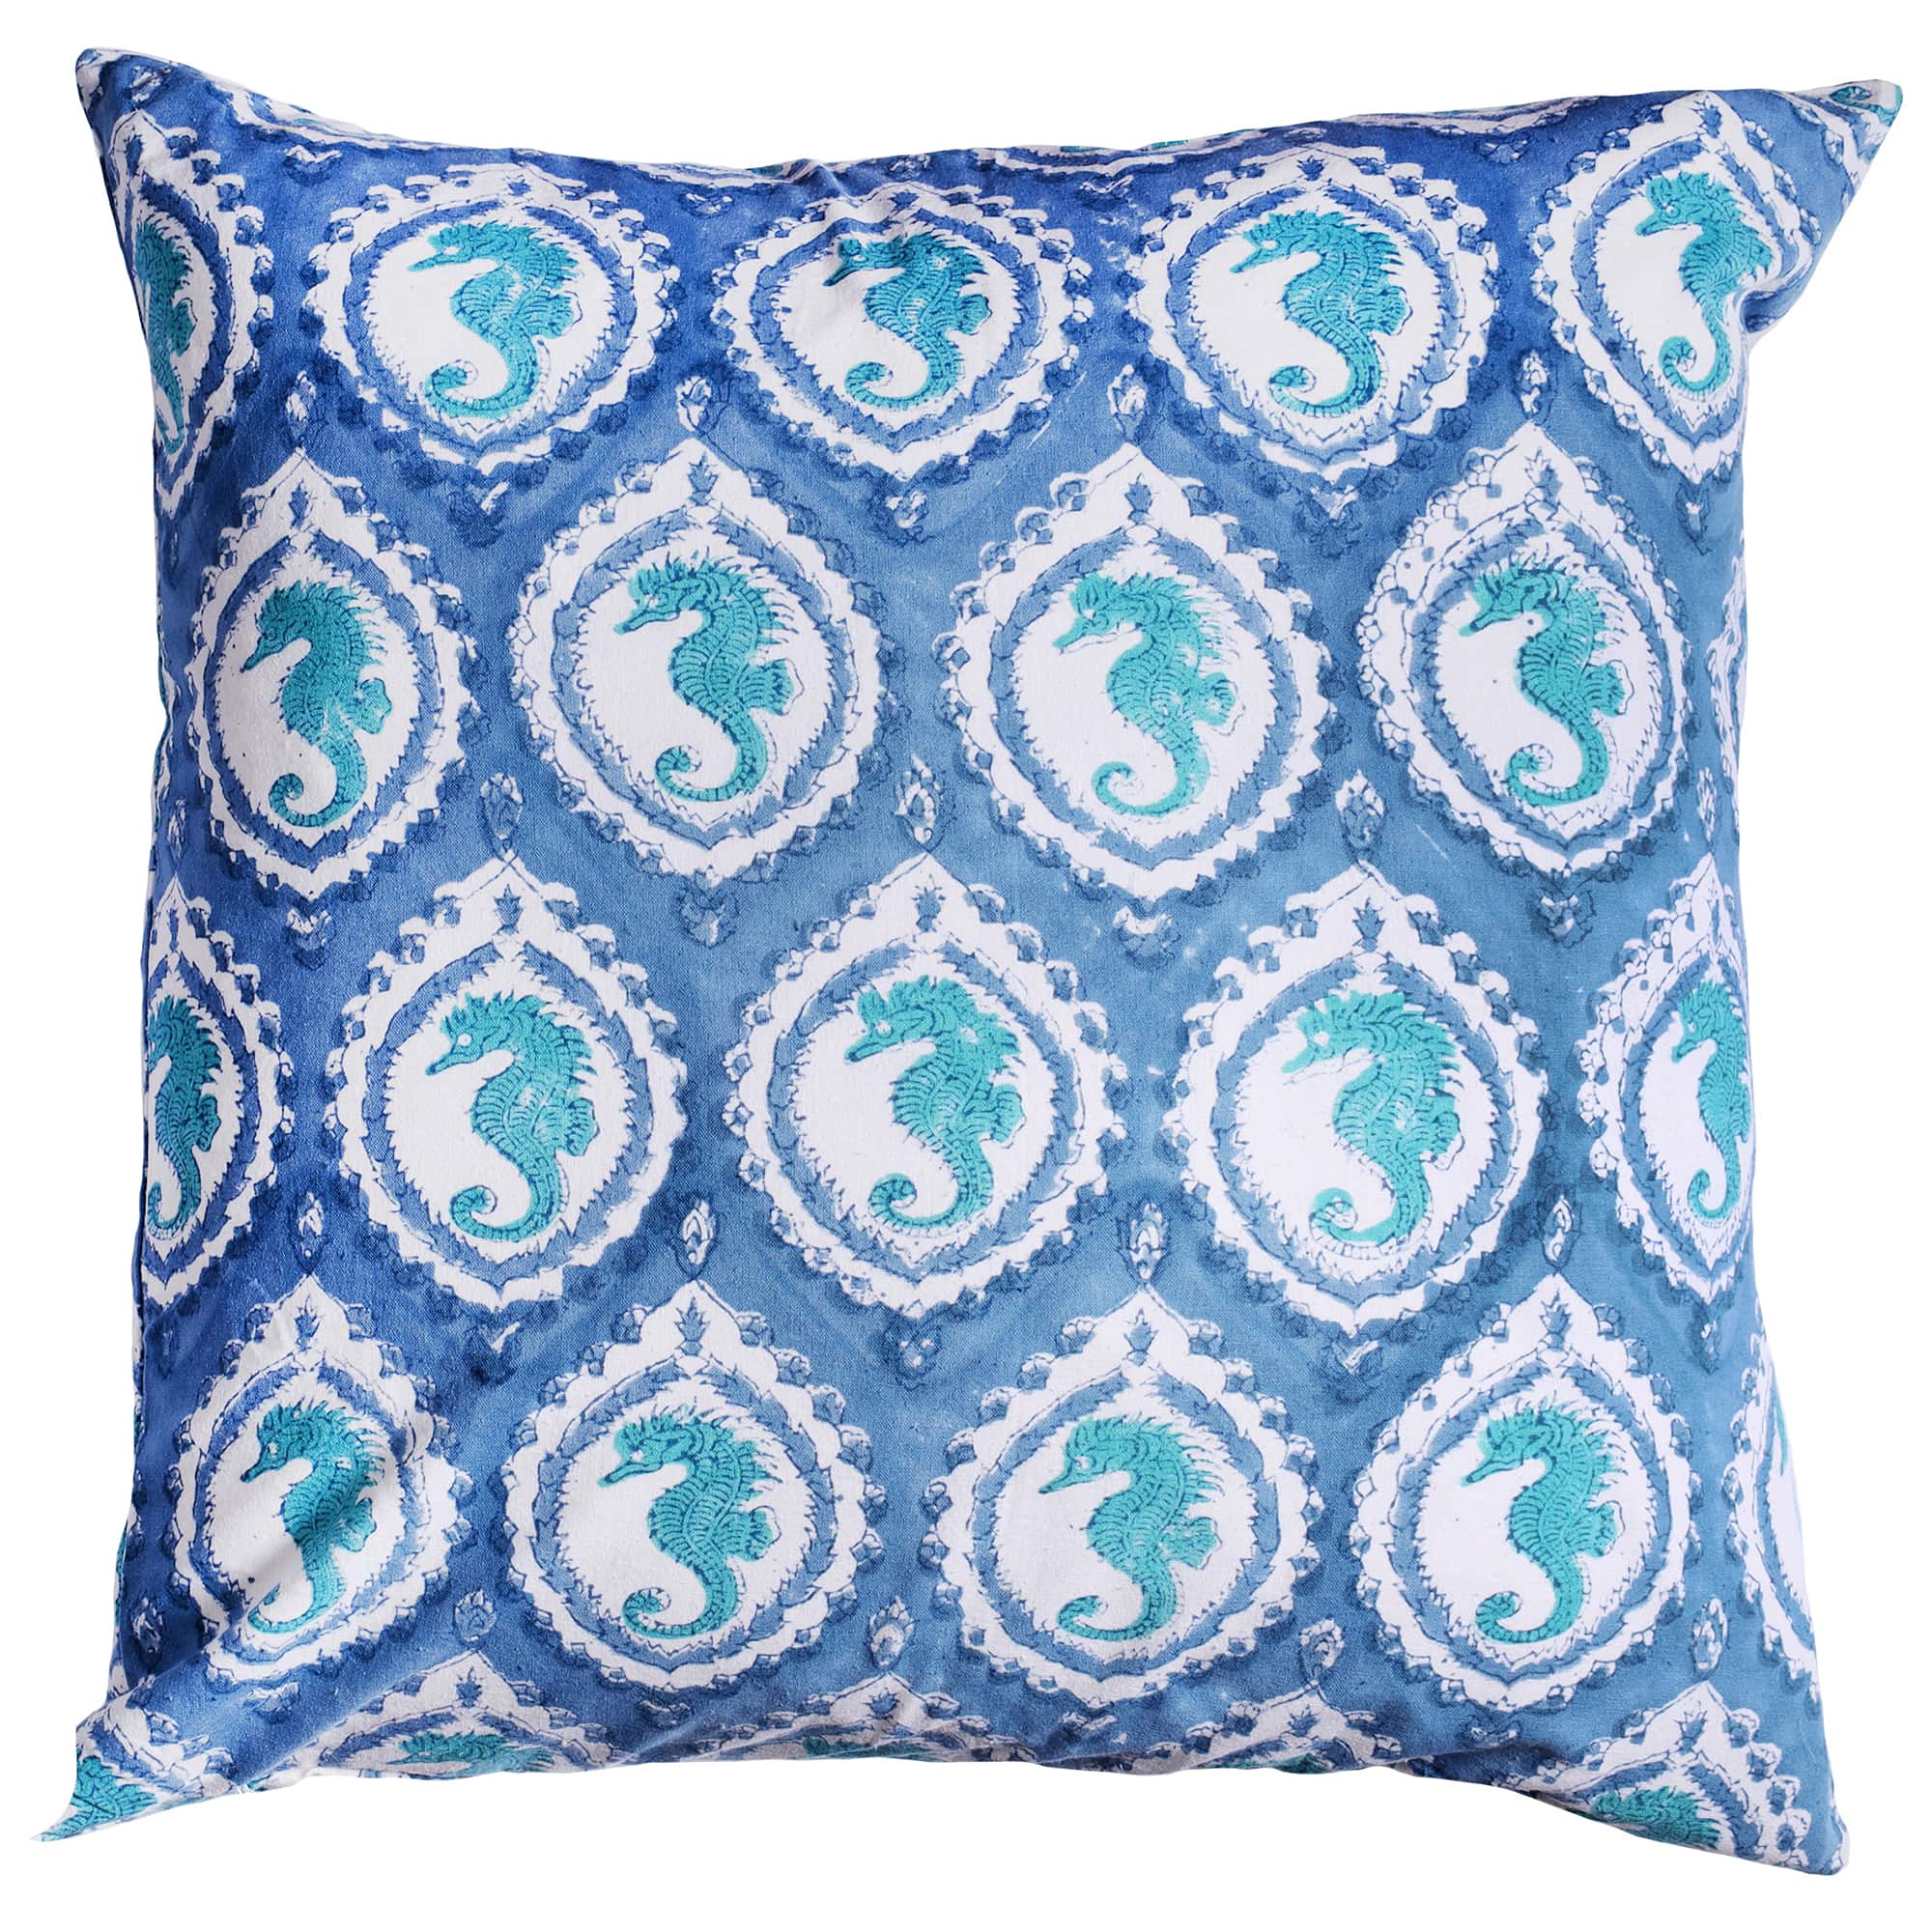 Marine Blue Seahorse Cameo cushion is a cute turquoise seahorse in a cameo design on white and the background colour is a soft warm blue.